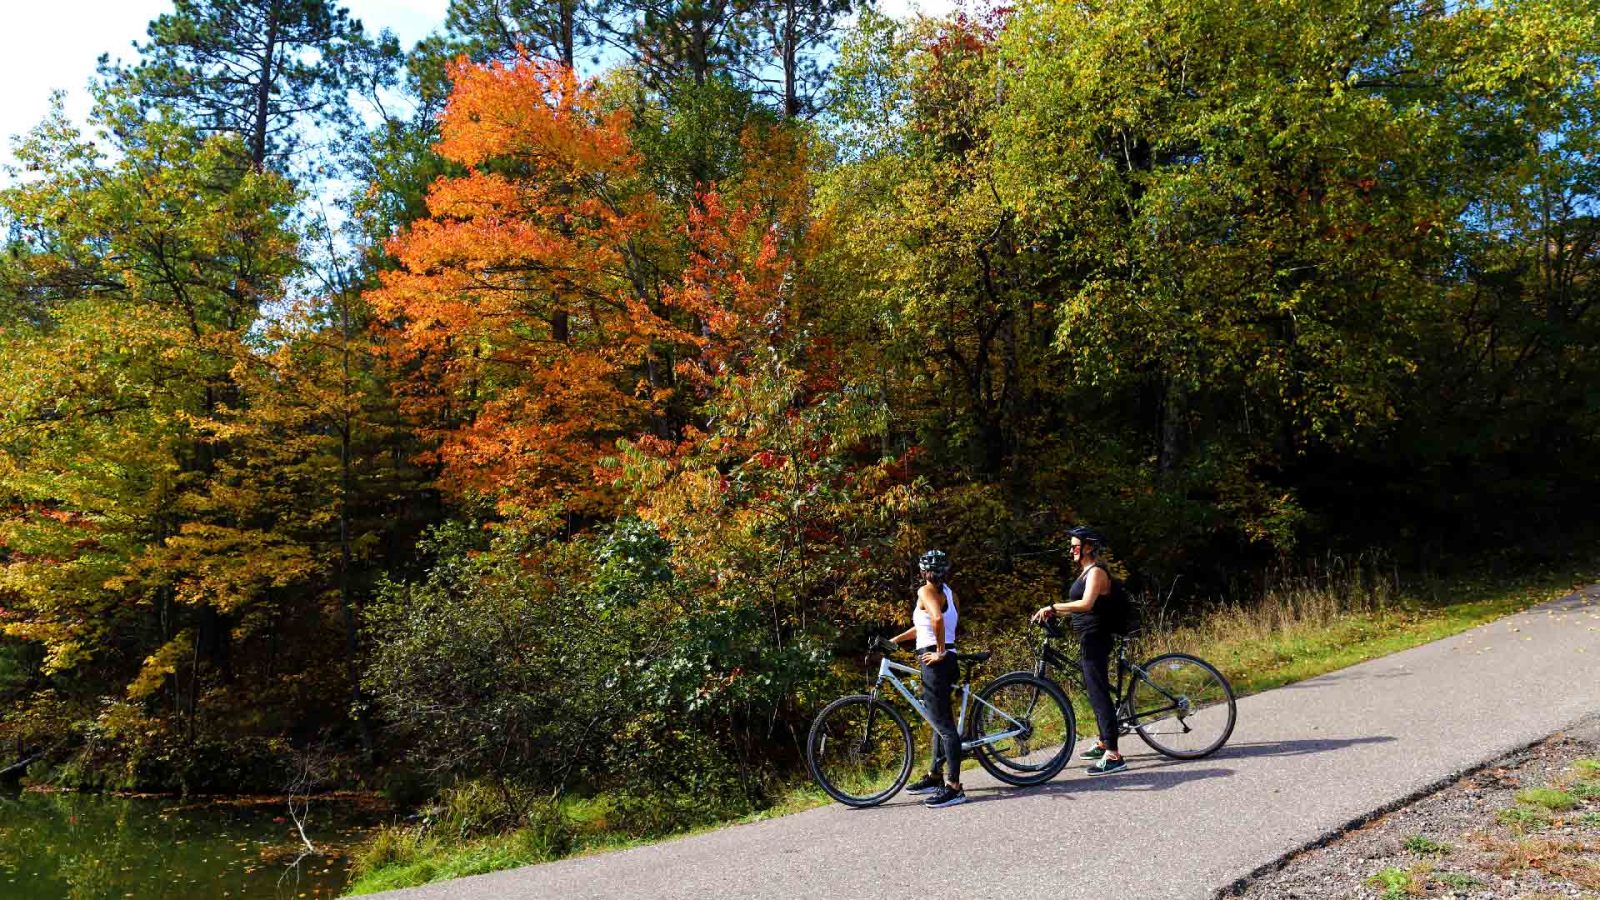 Autumn trail vews from the Heart of Vilas County paved bike trail system in St Germain, Wisconsin.